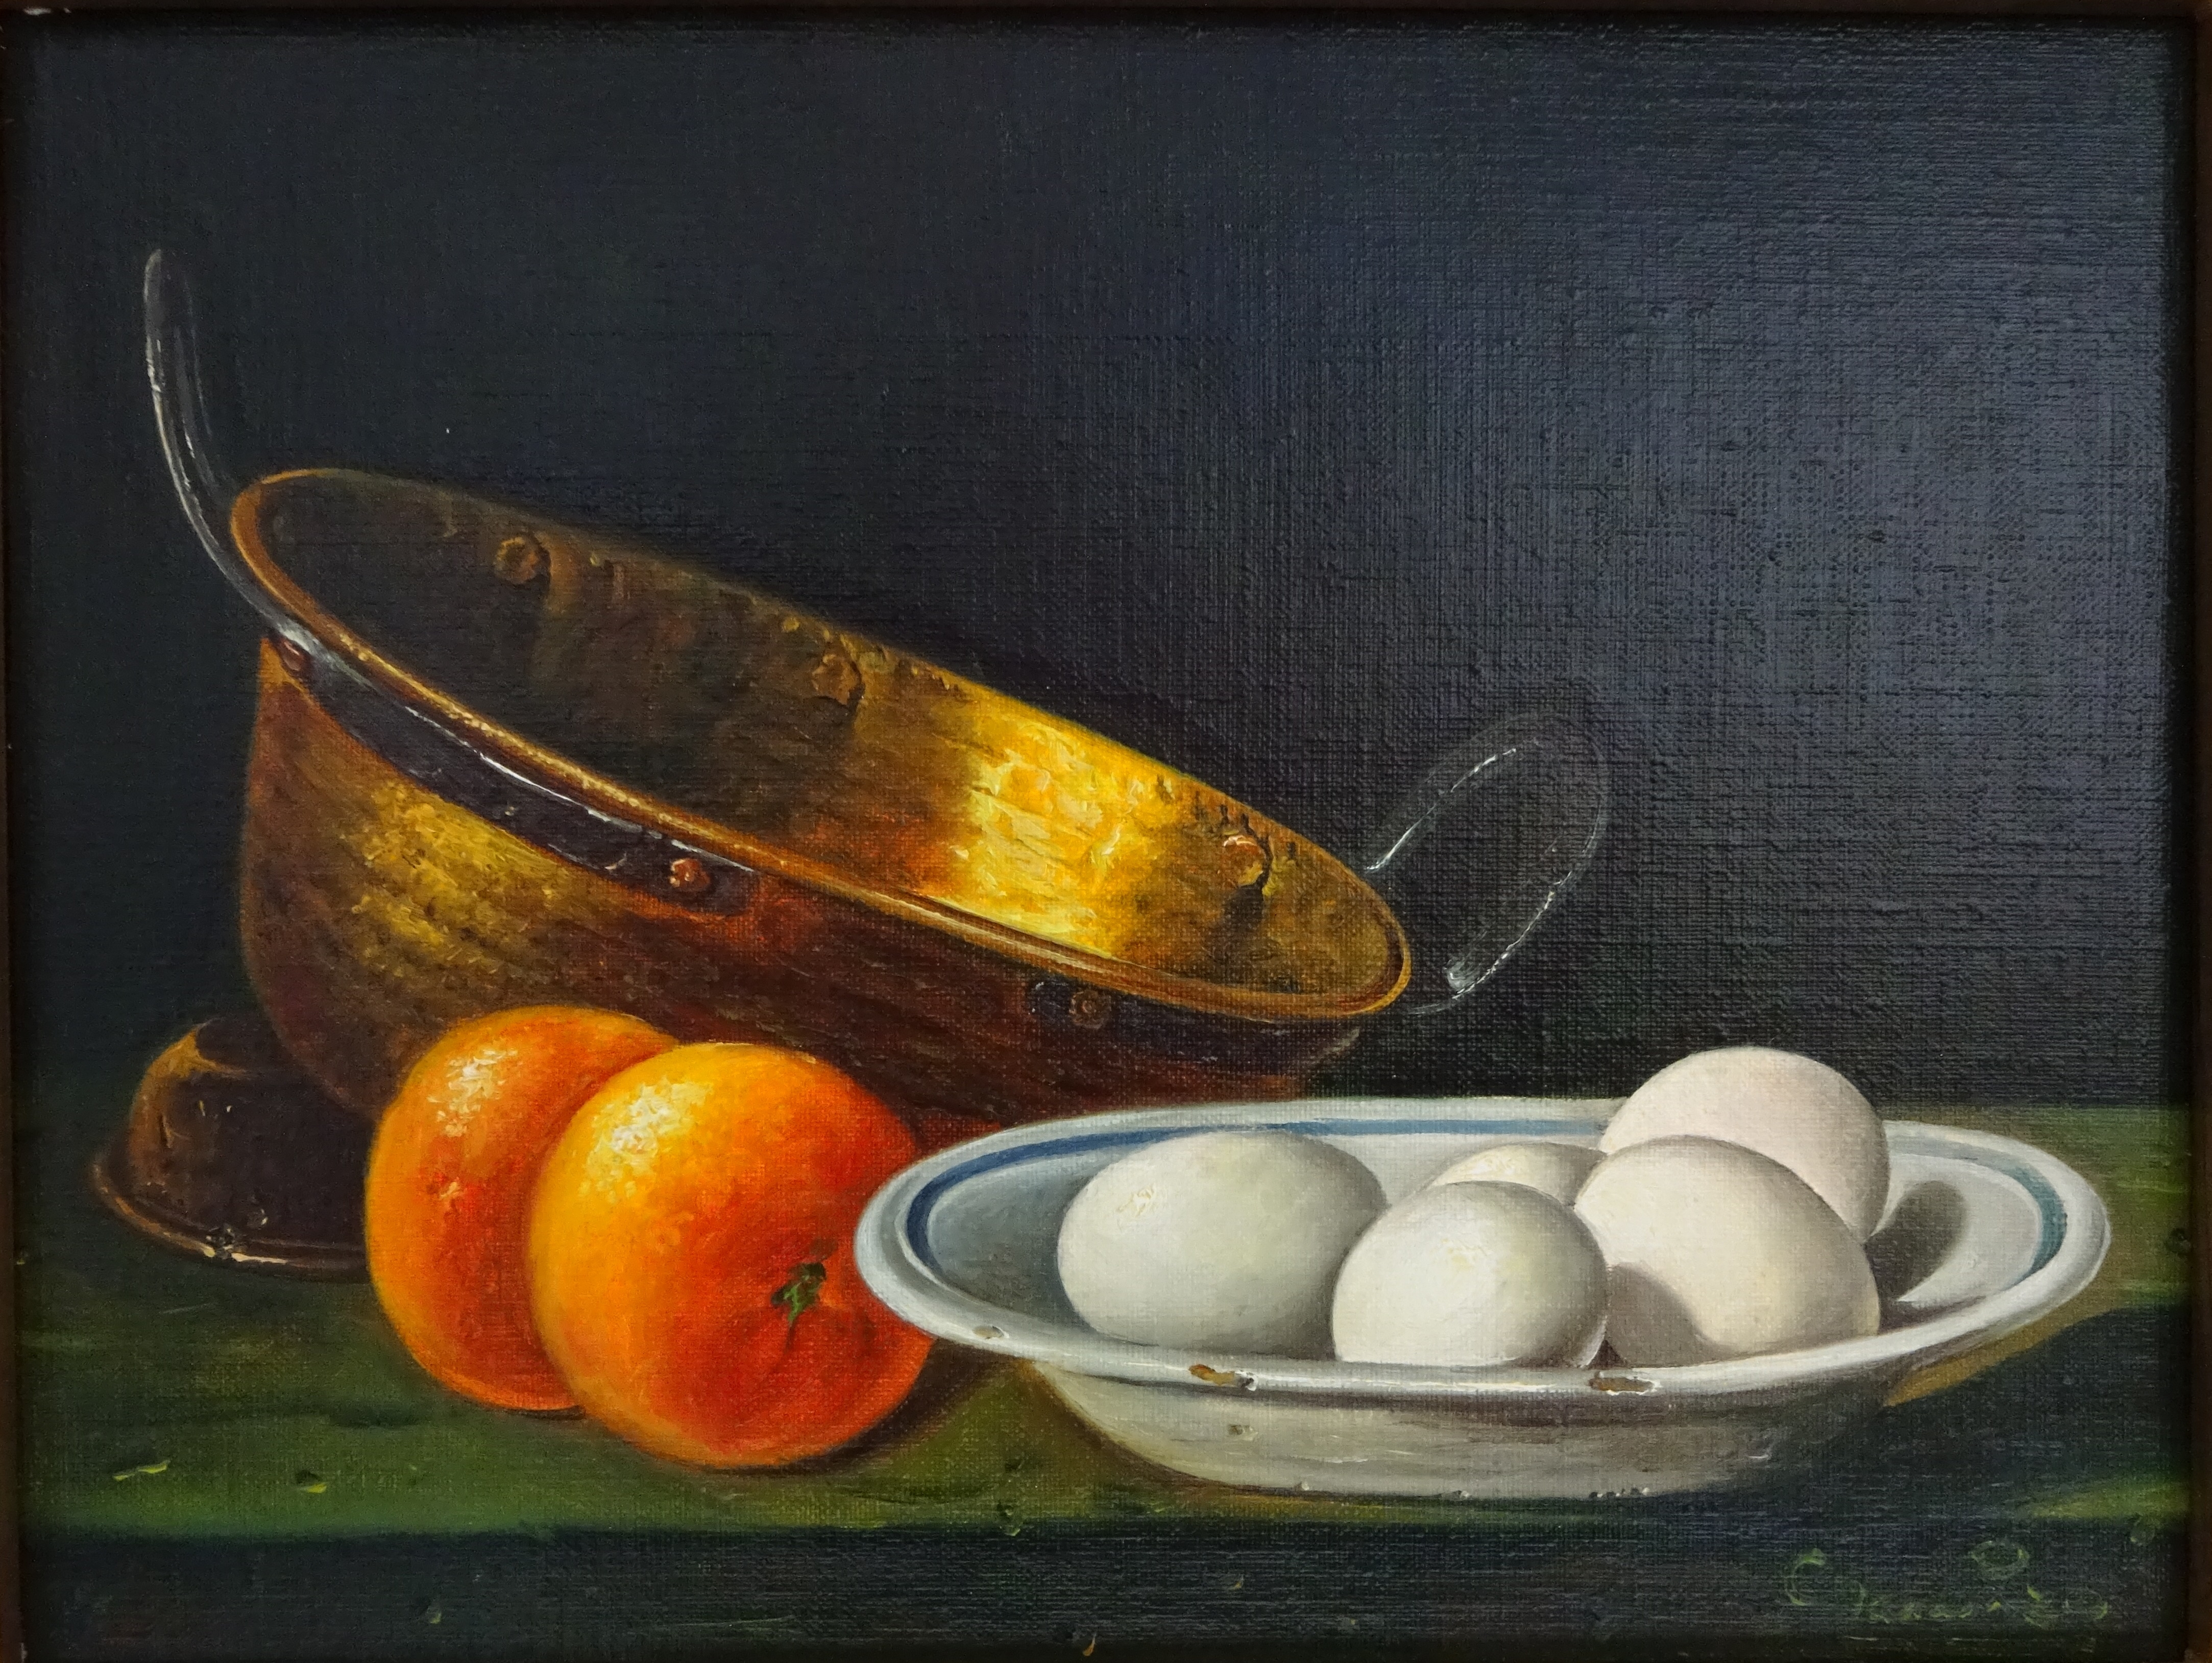 EGGS AND PLATE 3B